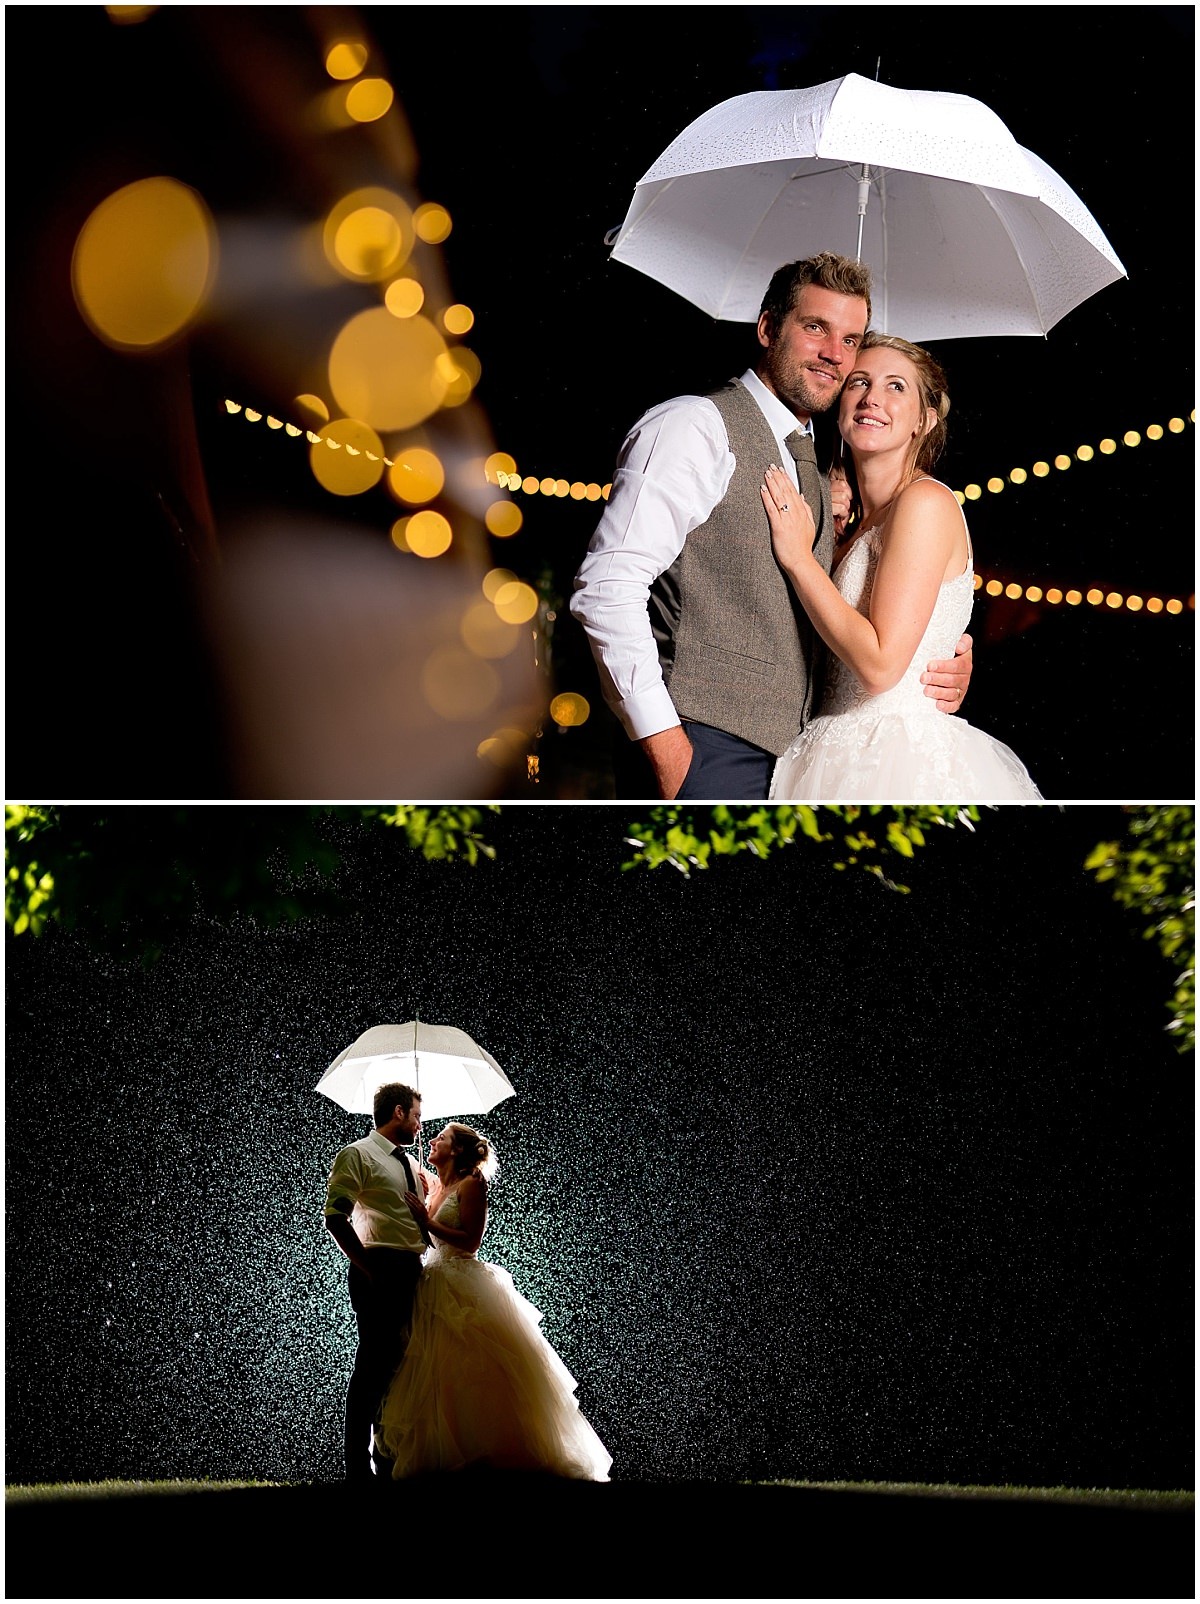 Bride and Groom Portrait at night